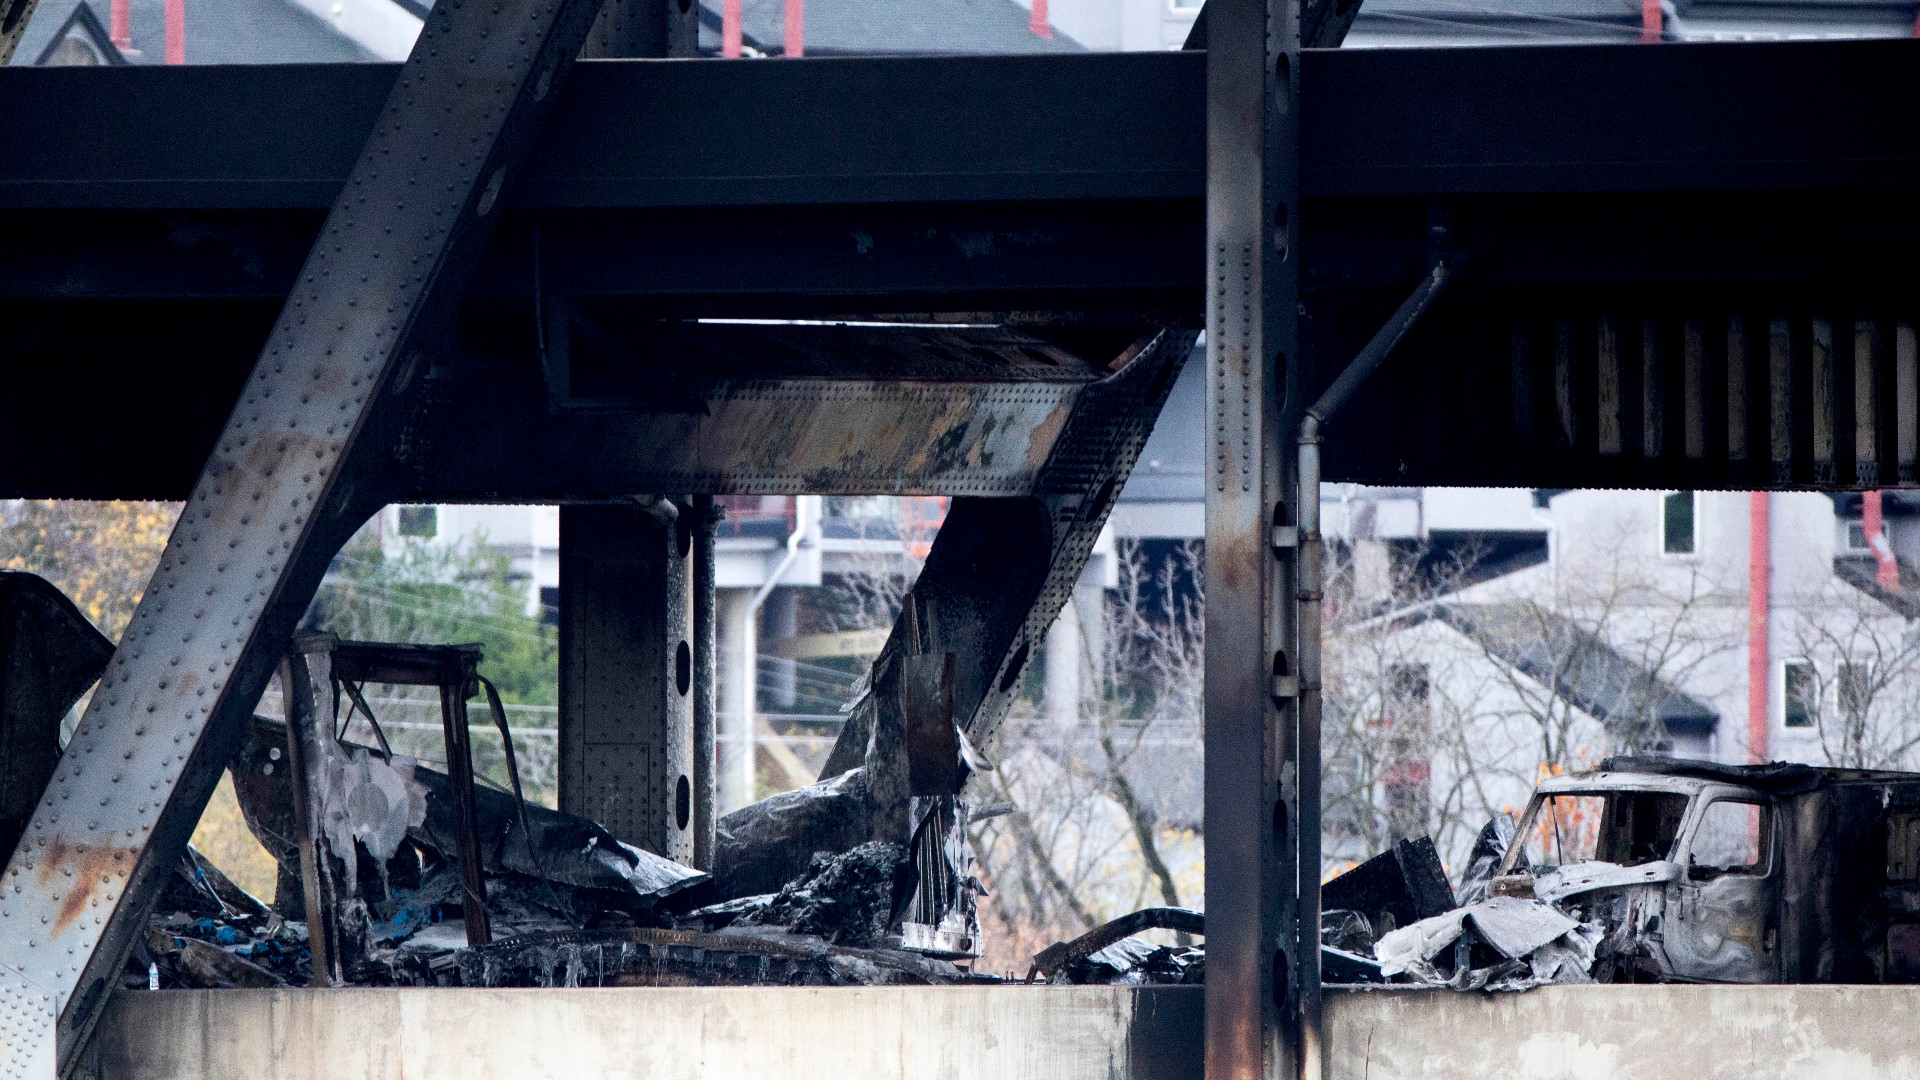 Brent Spence Bridge repairs have reached the halfway mark after a fiery semi crash three weeks ago. Crews have been able to remove parts damaged by the flames.